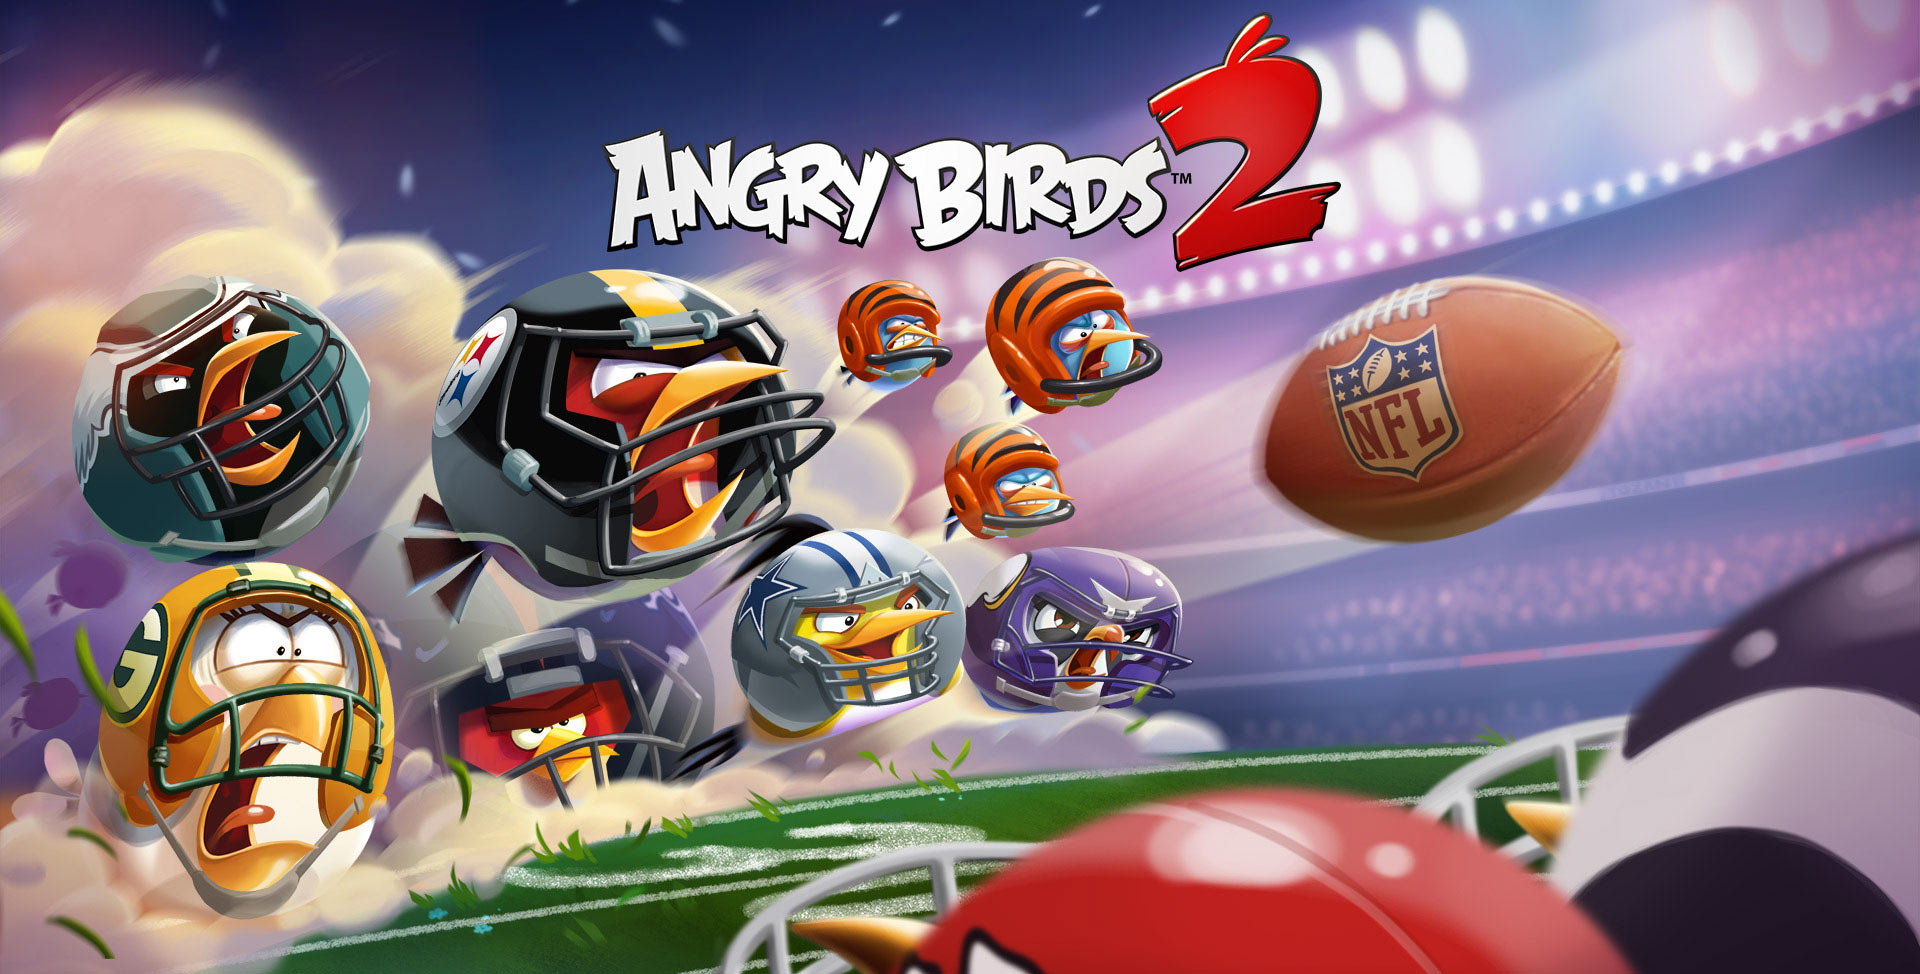 Angry Birds Super Bowl LII NFL event